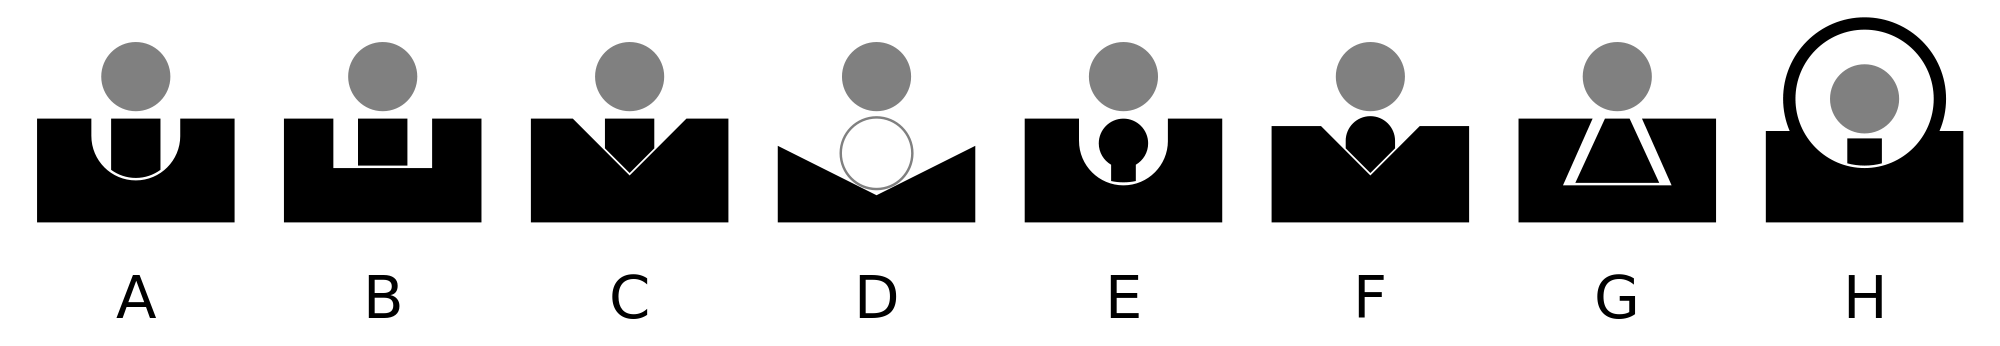 types of sights